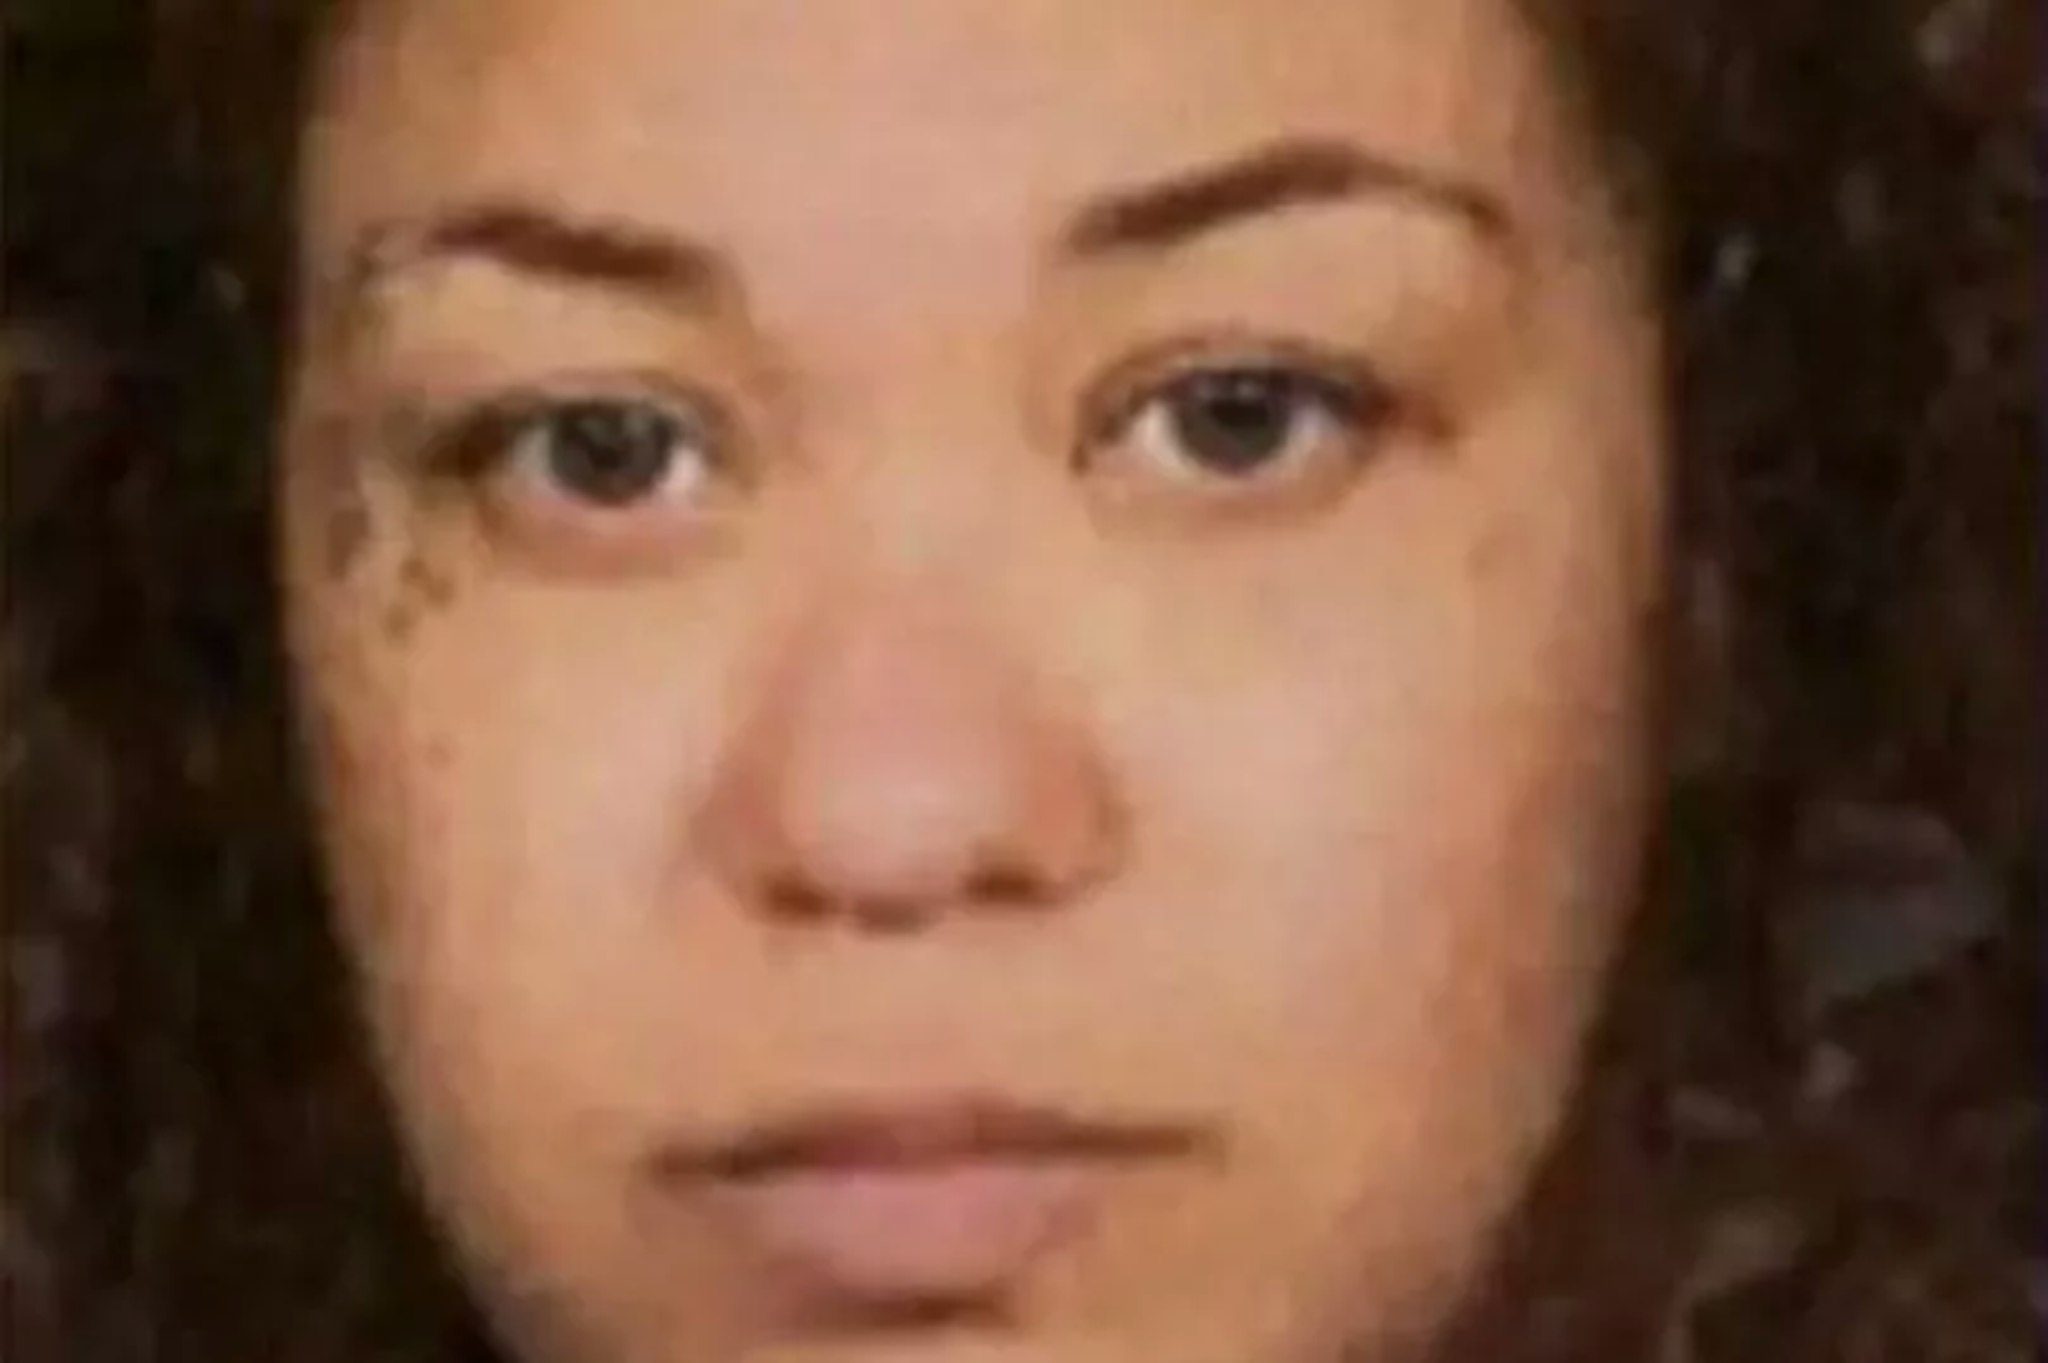 Sharday McDonald, 30, was sentenced to 30 day in jail for waterboarding her infant son and putting him in a freezer to spite his father.